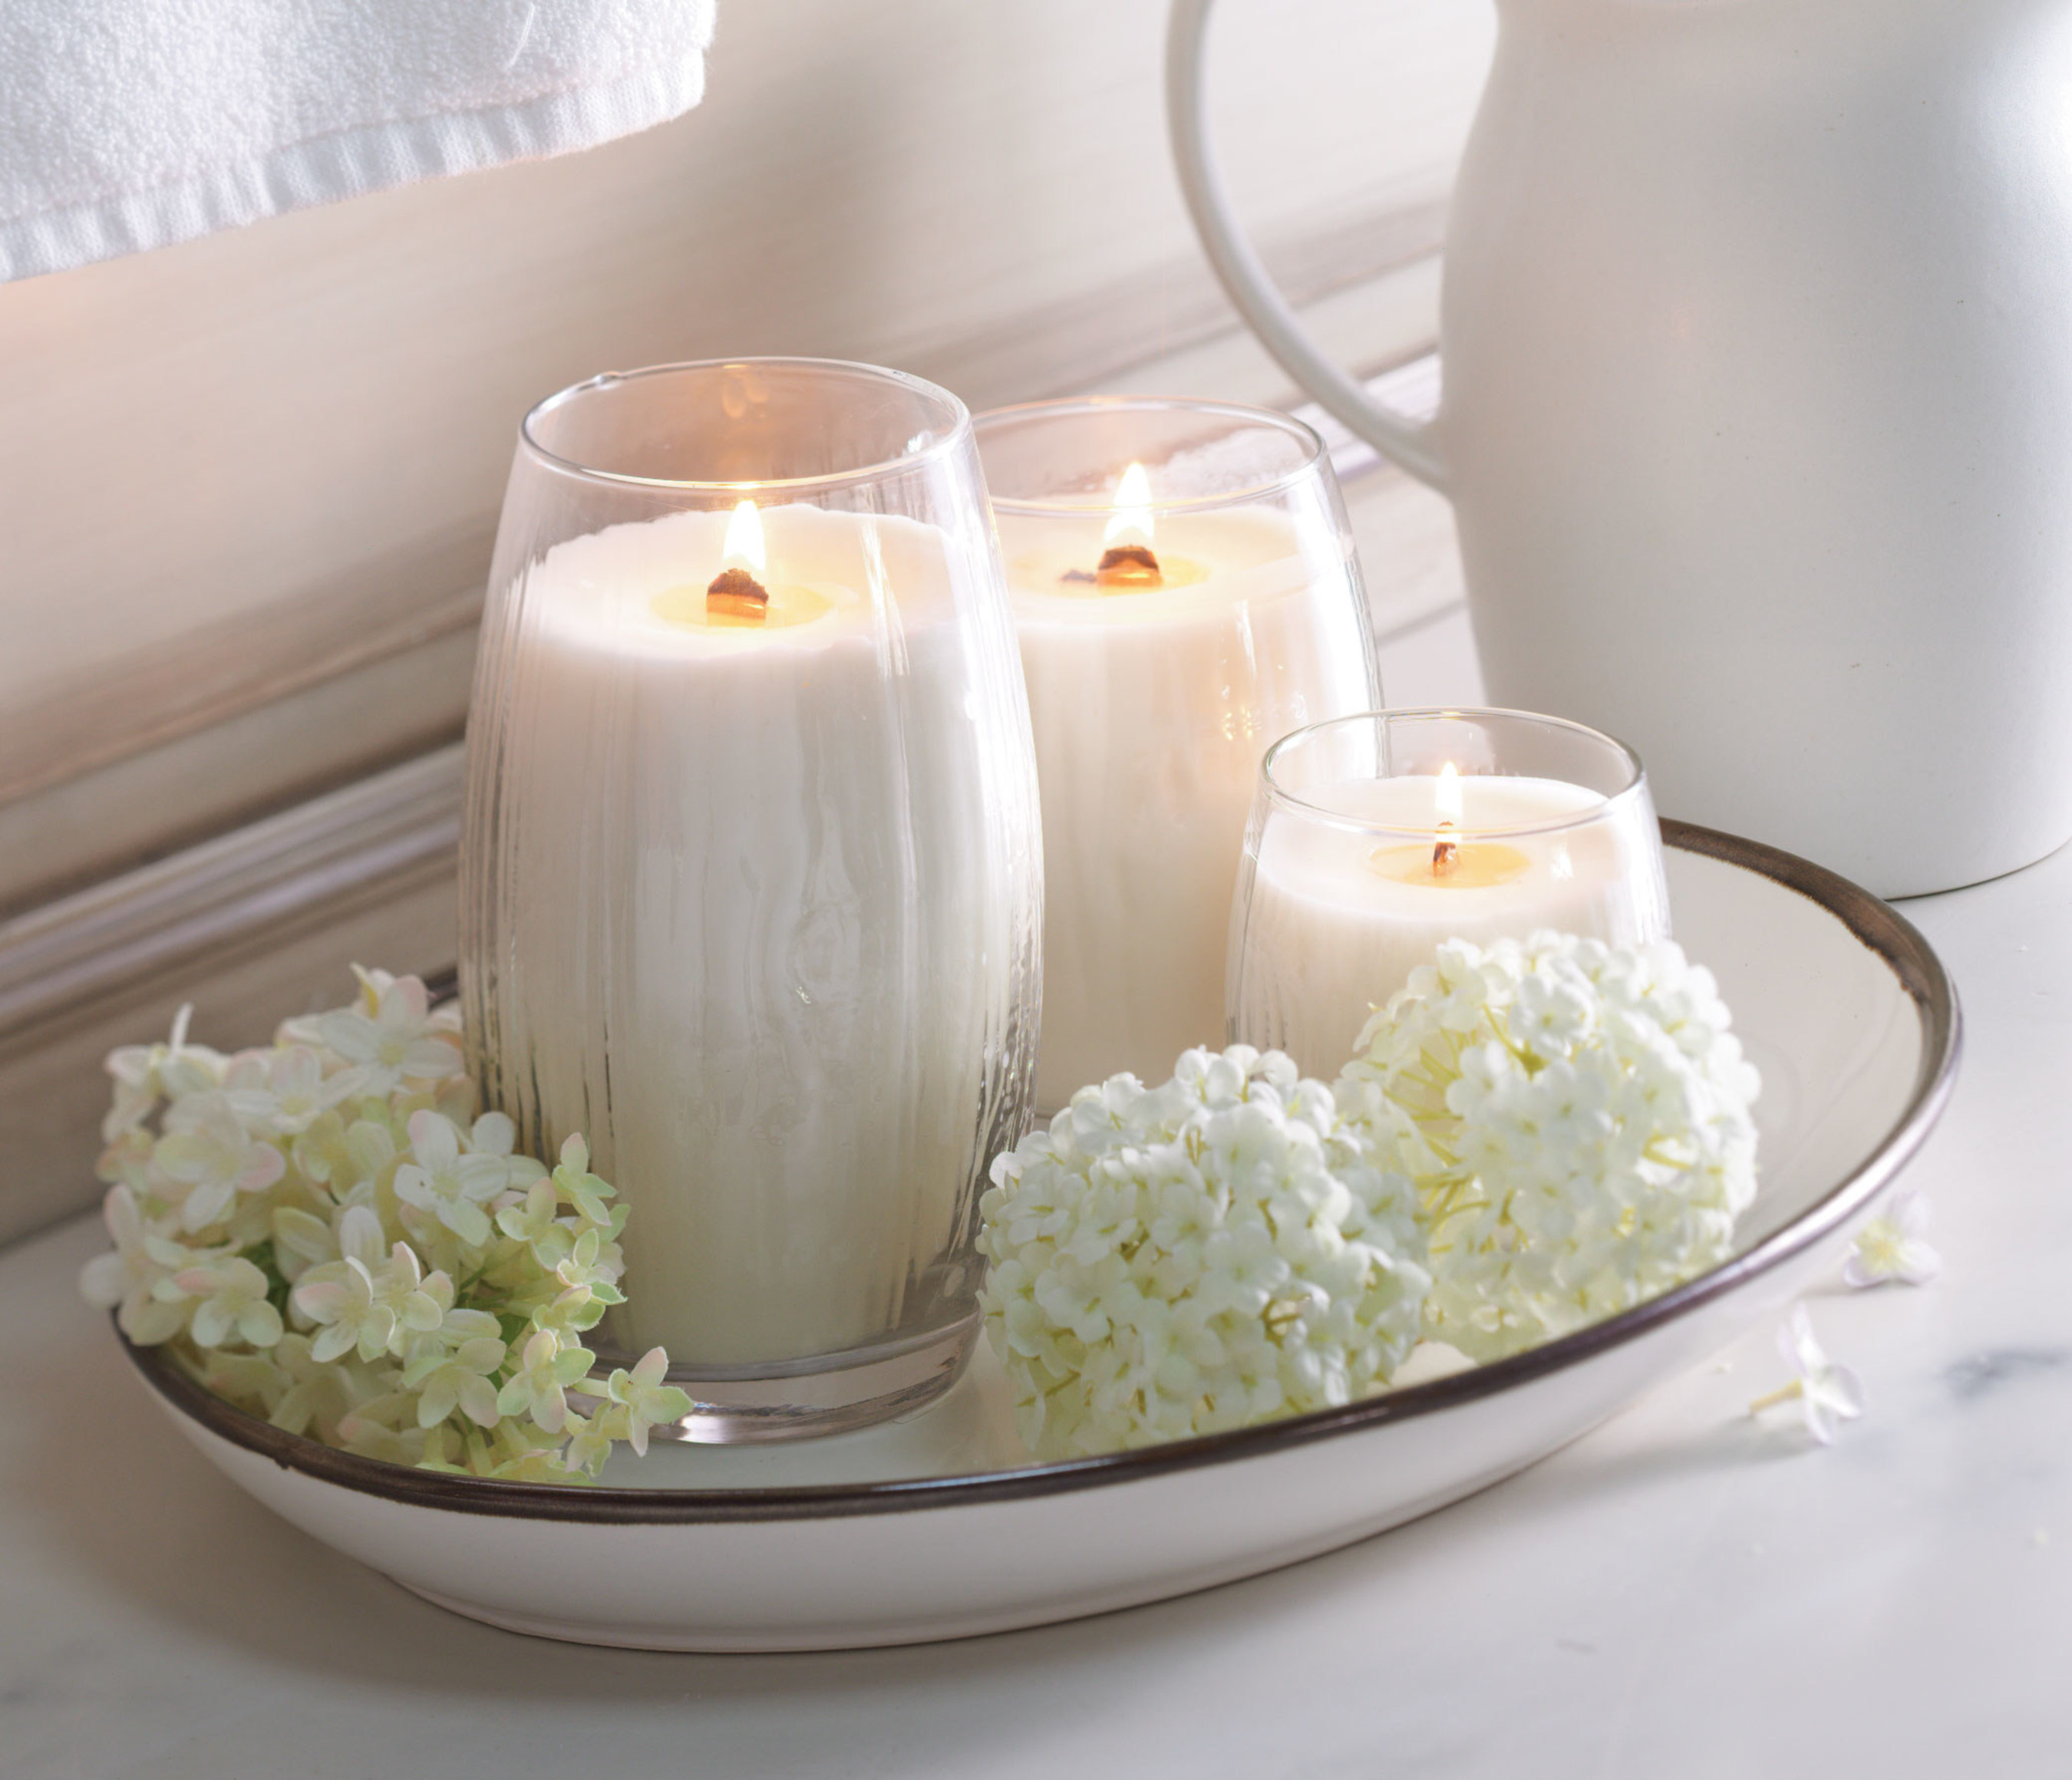 Heavenly sweet and luxurious, Whisper is one of five new spring fragrances in Yankee Candle's Pure Radiance line.